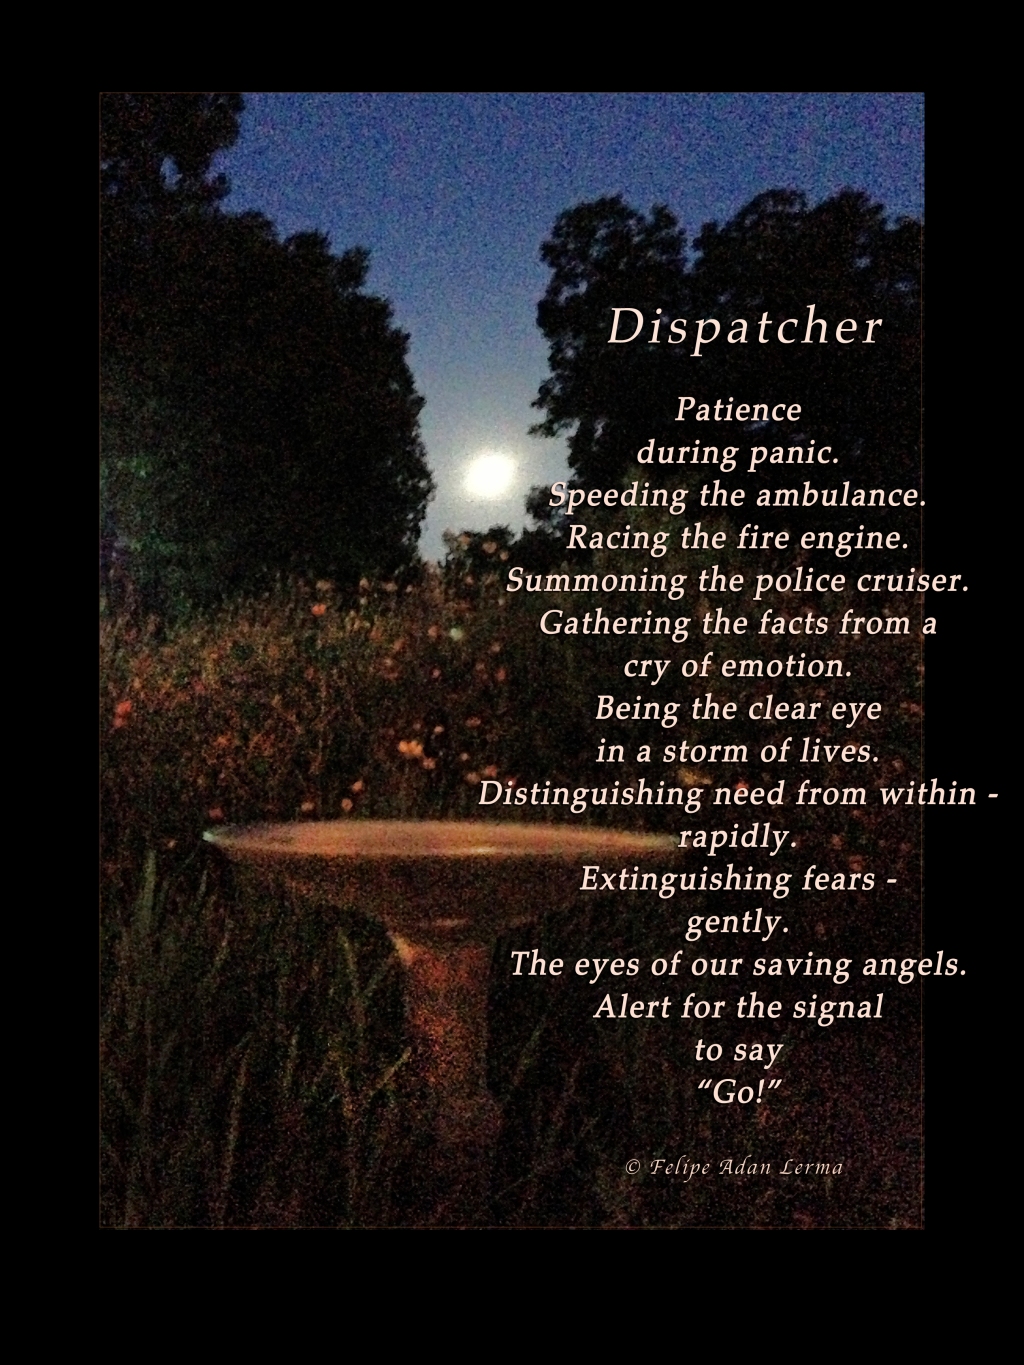 November 21, 2022 – My Most Viewed Image this Past Week @FineArtAmerica, “Dispatcher” : circa 2011